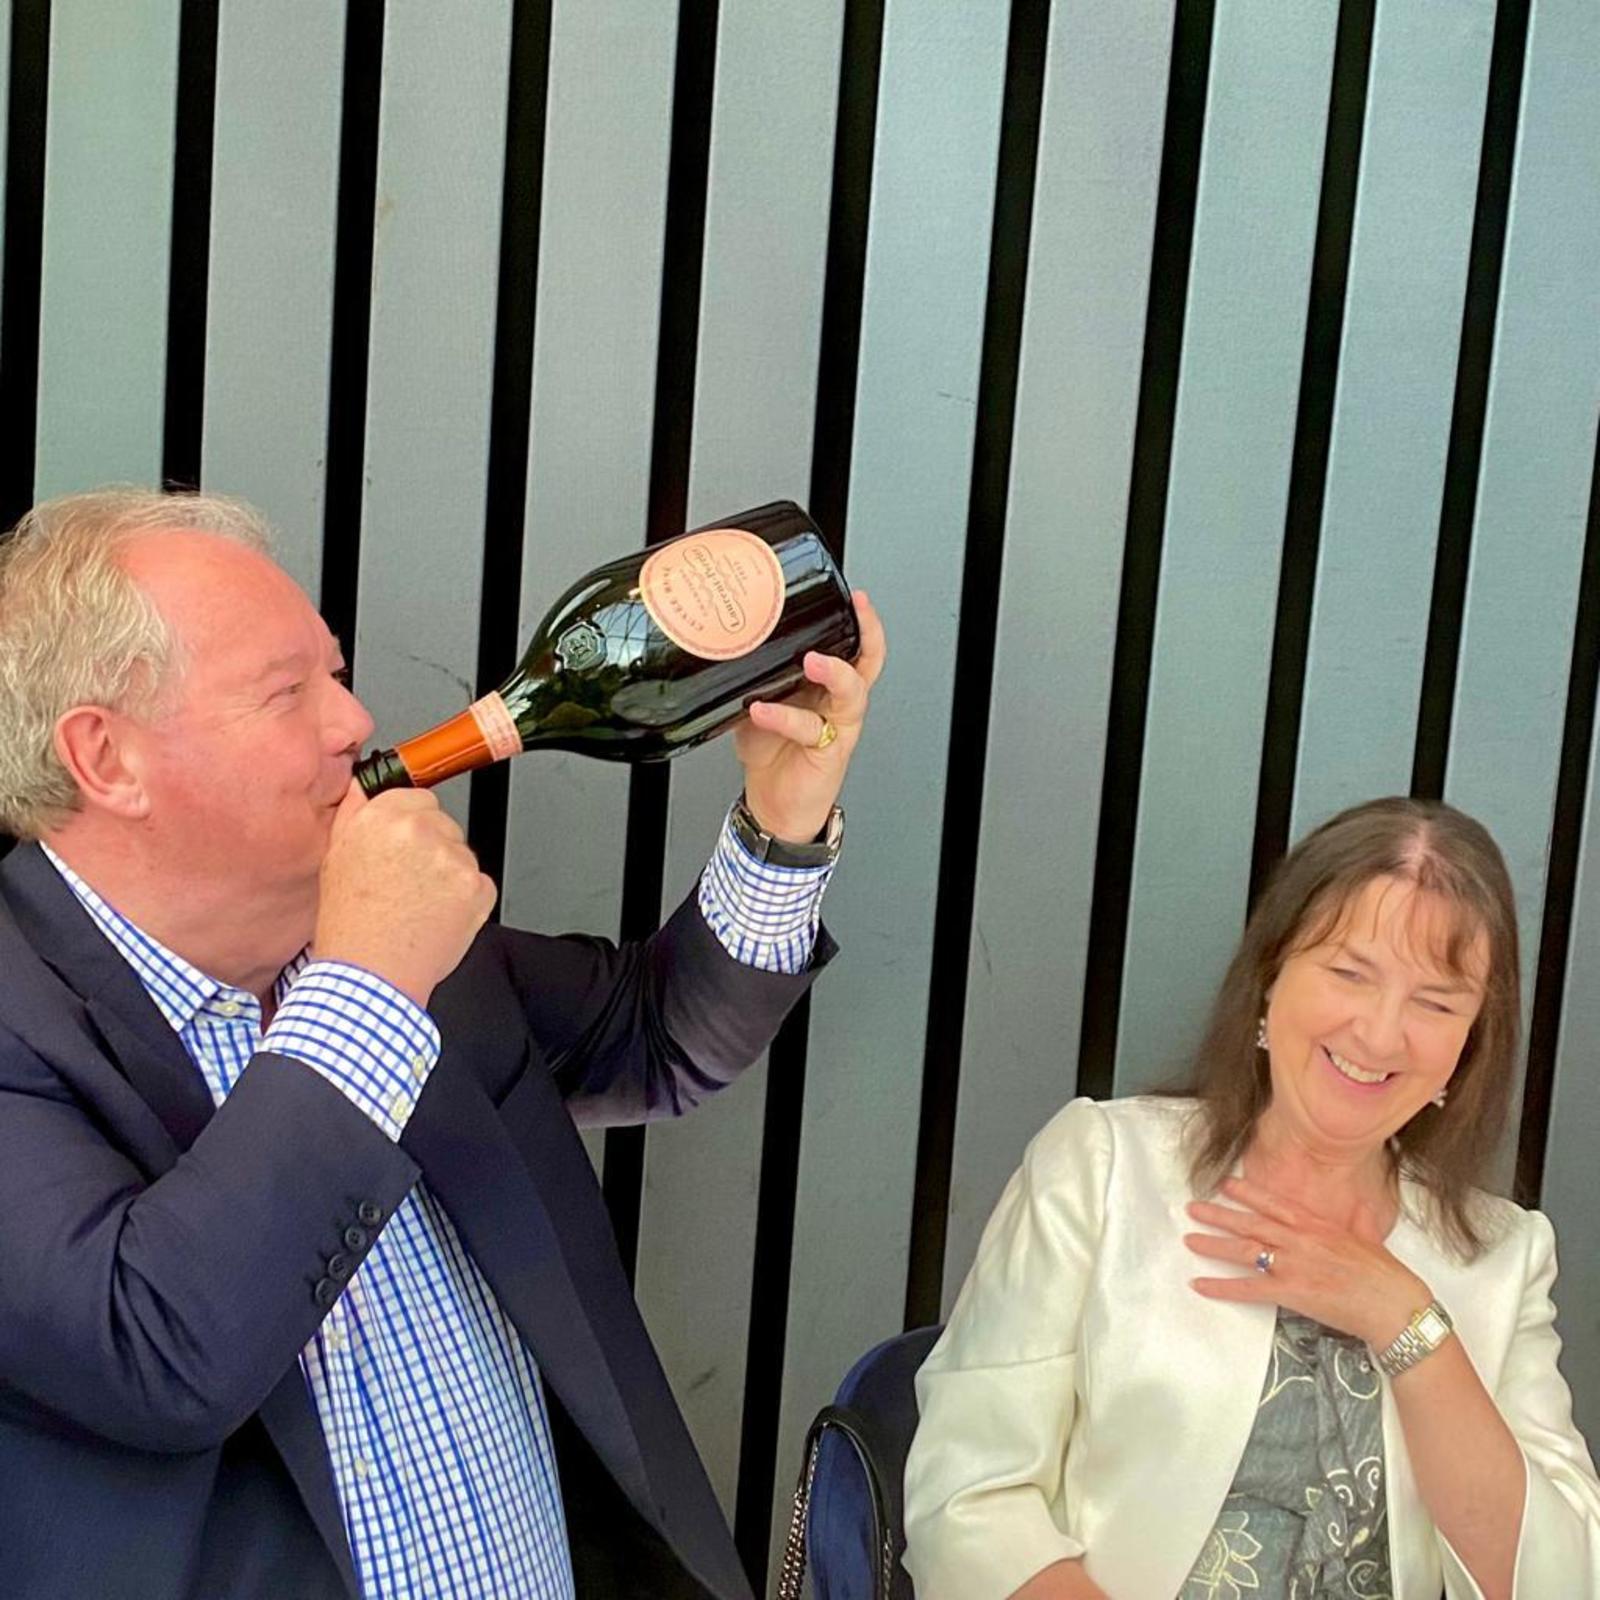 2 August 2023 - Delicious champagnes and mouth-watering ‘gastronomie’ were in evidence at the Ordre des Coteaux de Champagne’s Summer event at The Gherkin.